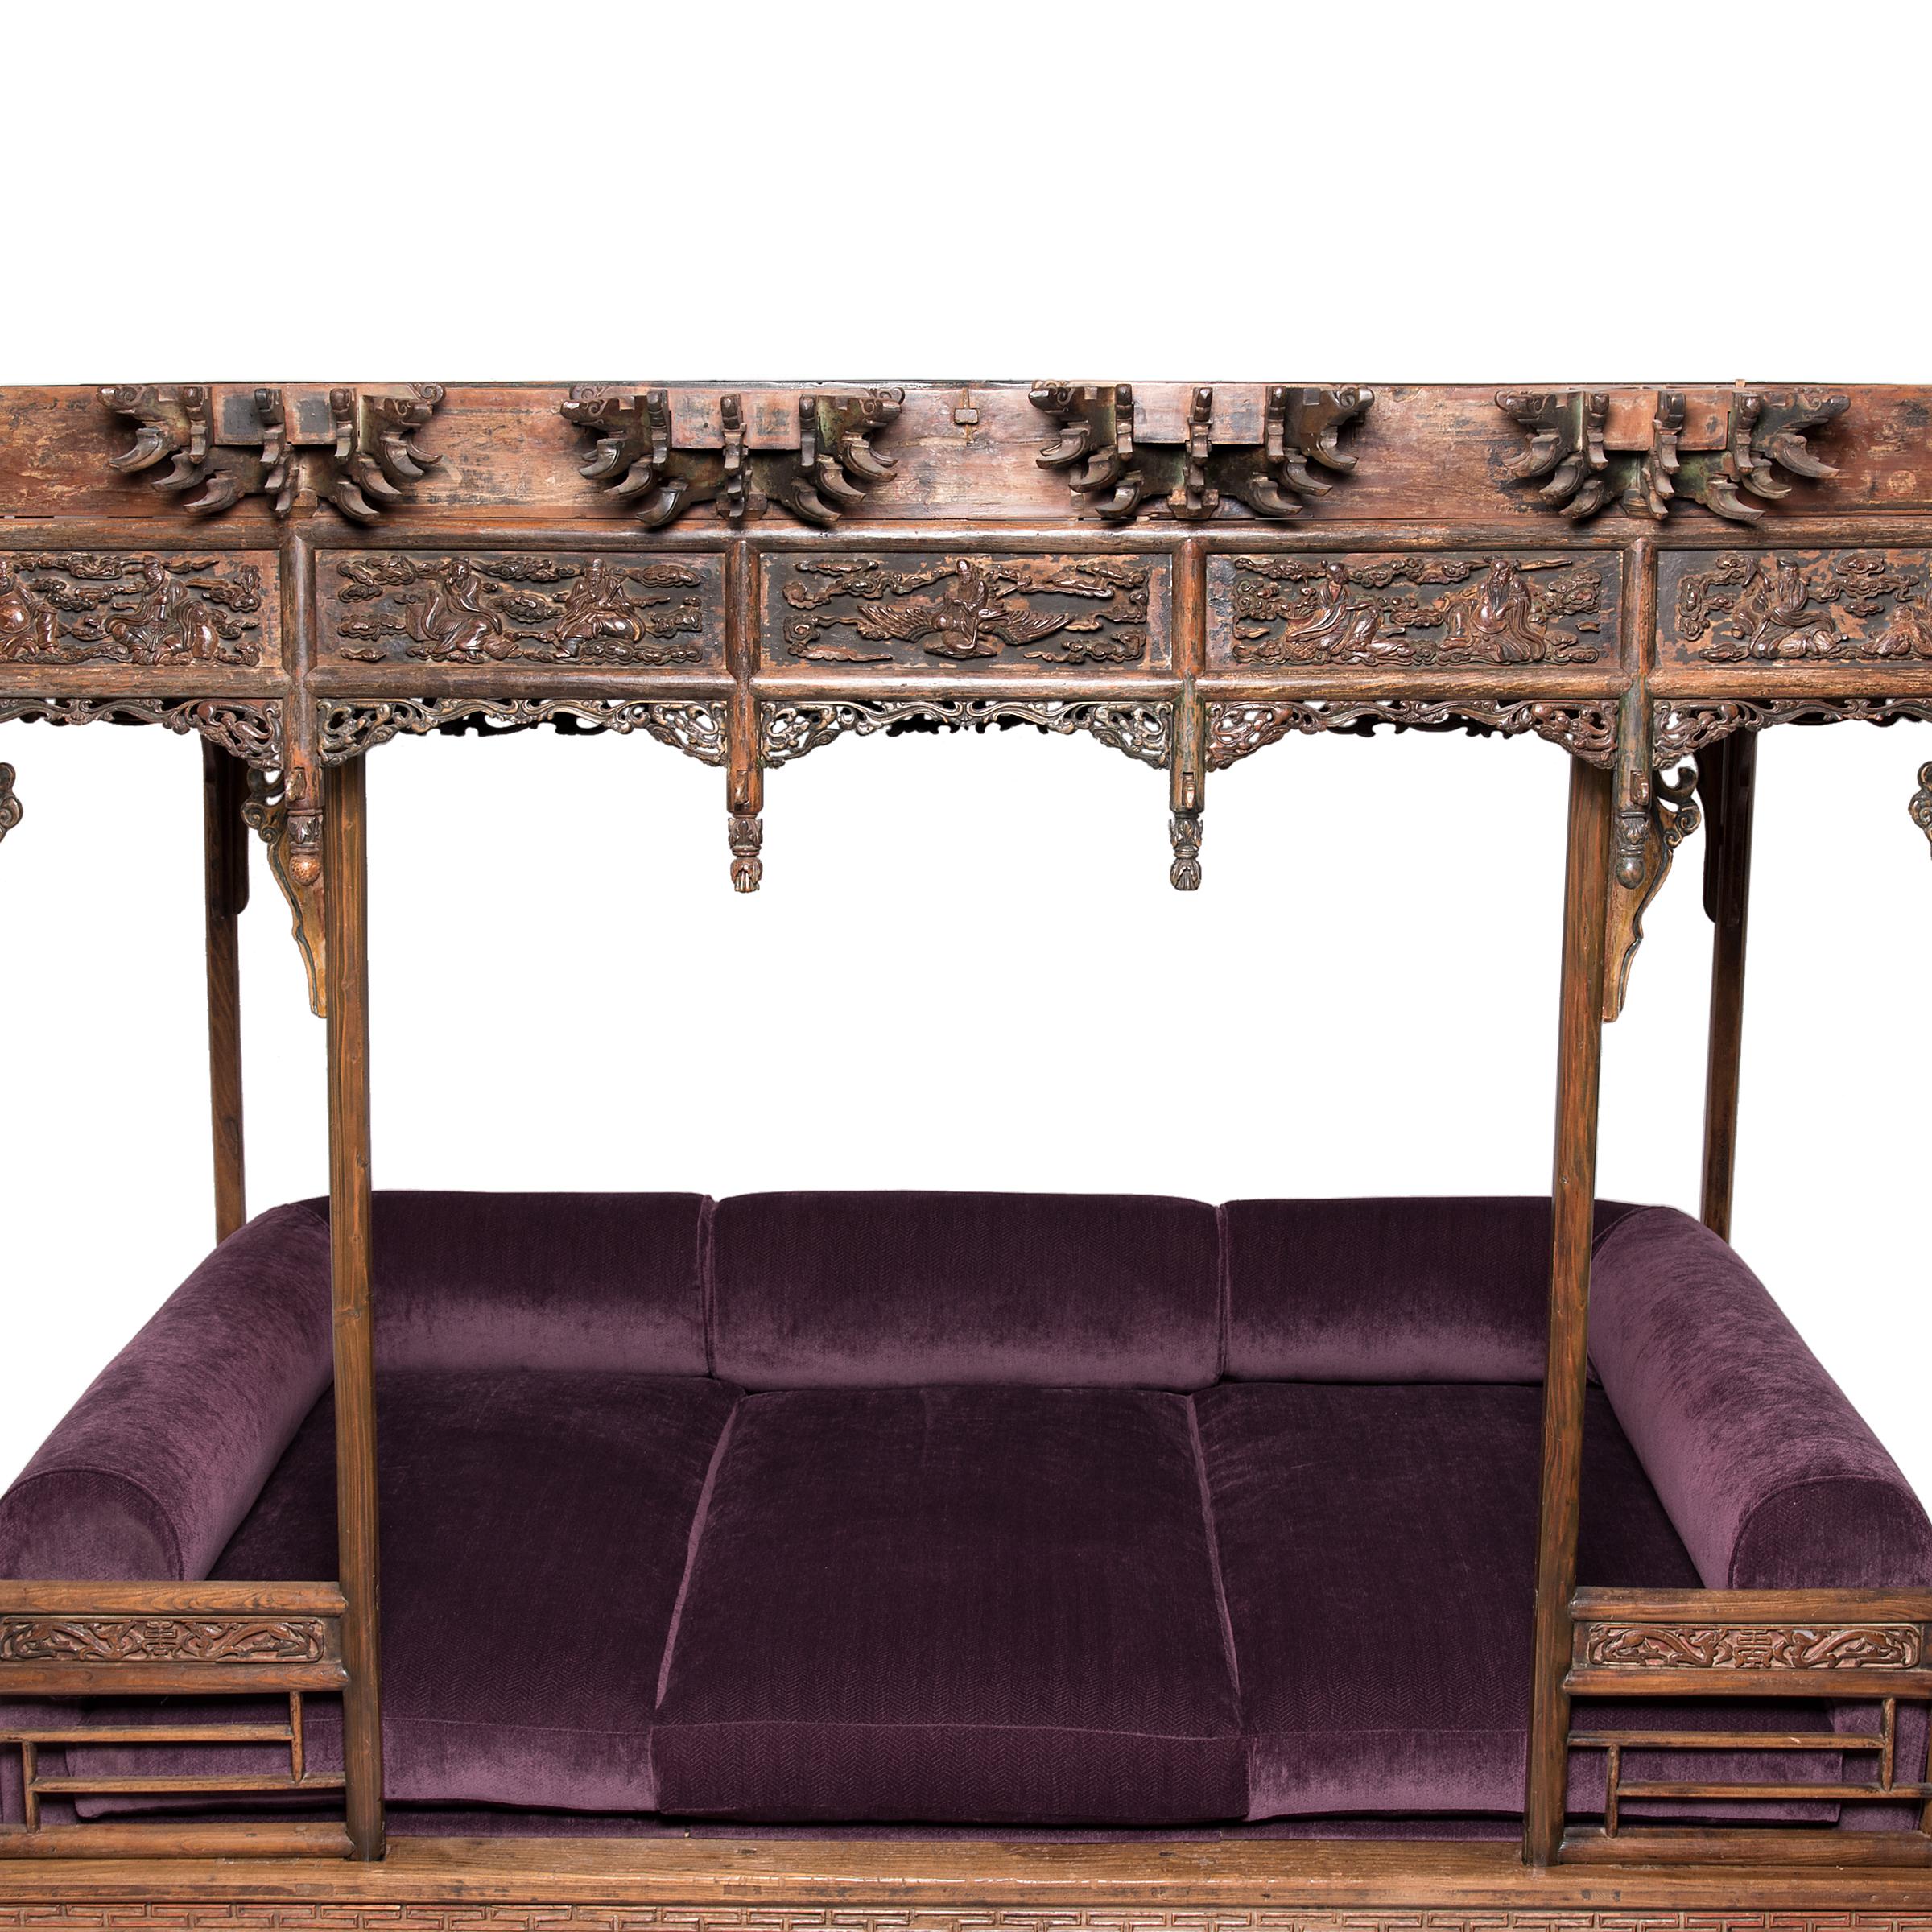 Qing Ornate Chinese Canopy Bed, c. 1750